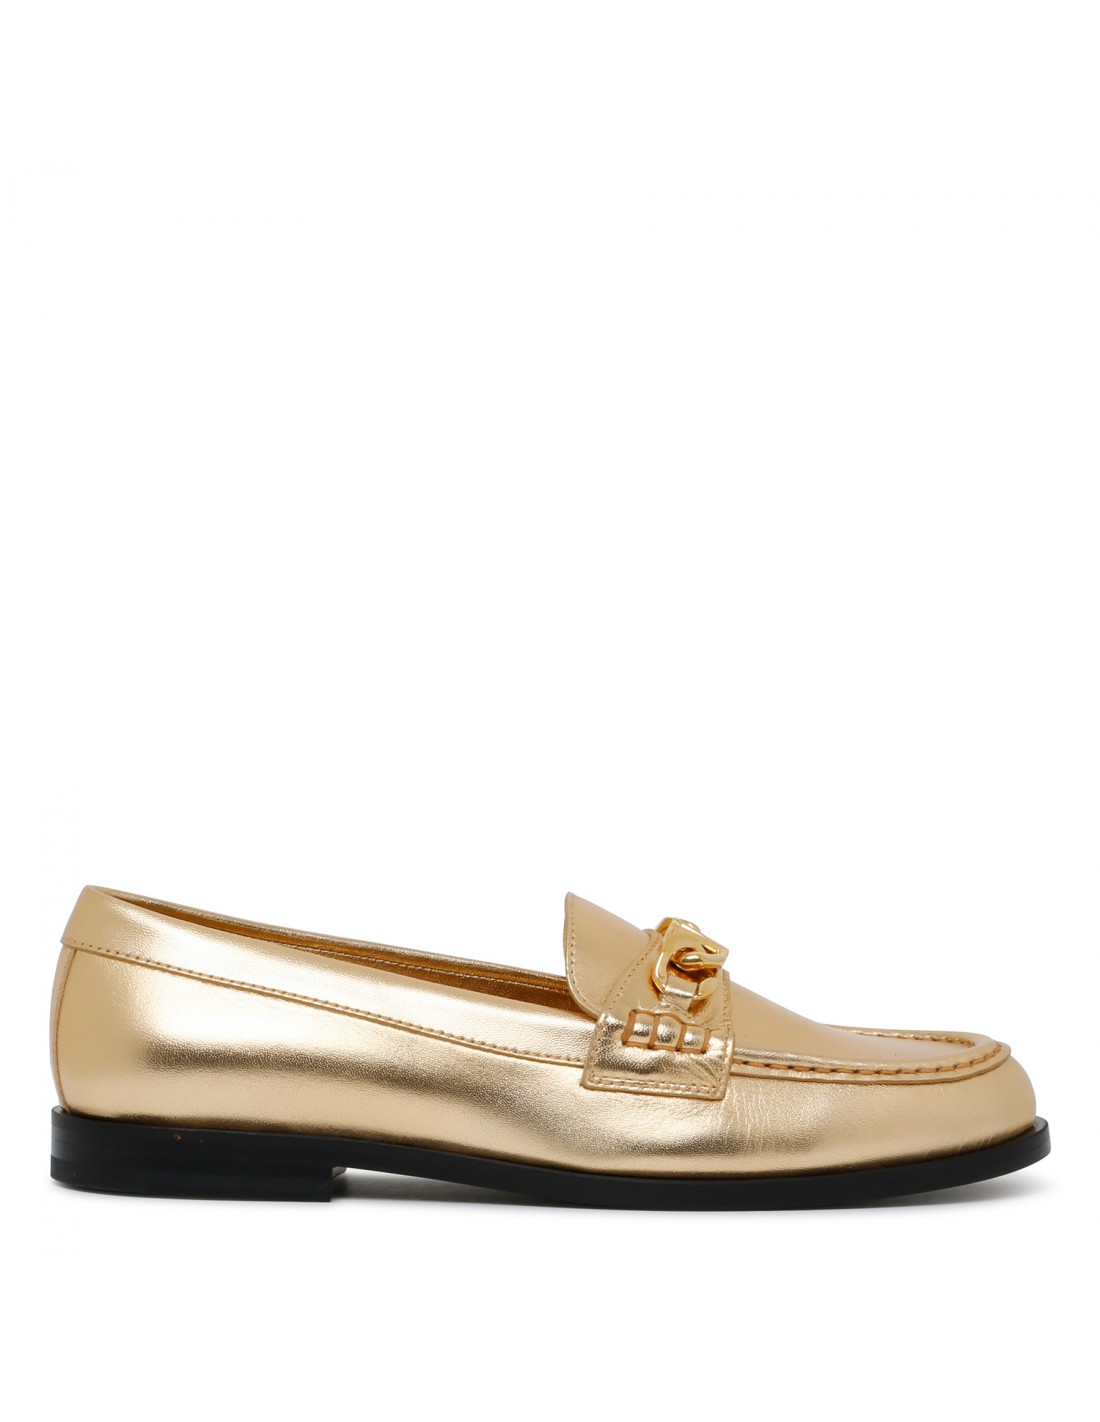 VLogo chain loafers